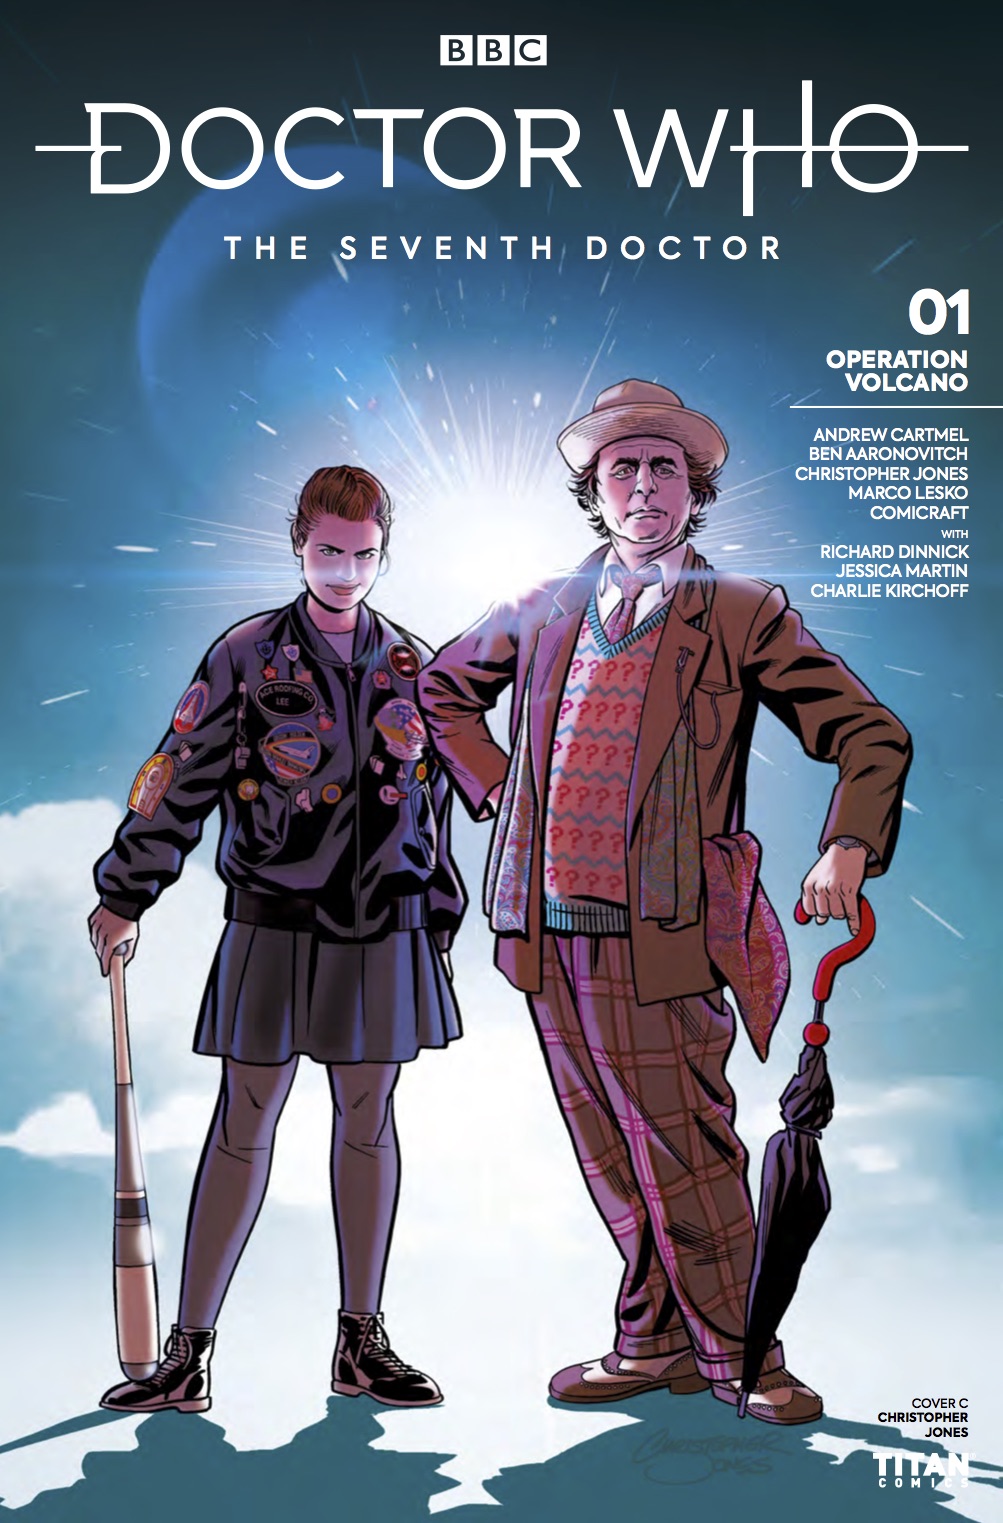 Doctor Who - The Seventh Doctor - Operation Volcano #1 Cover C by Christopher Jones